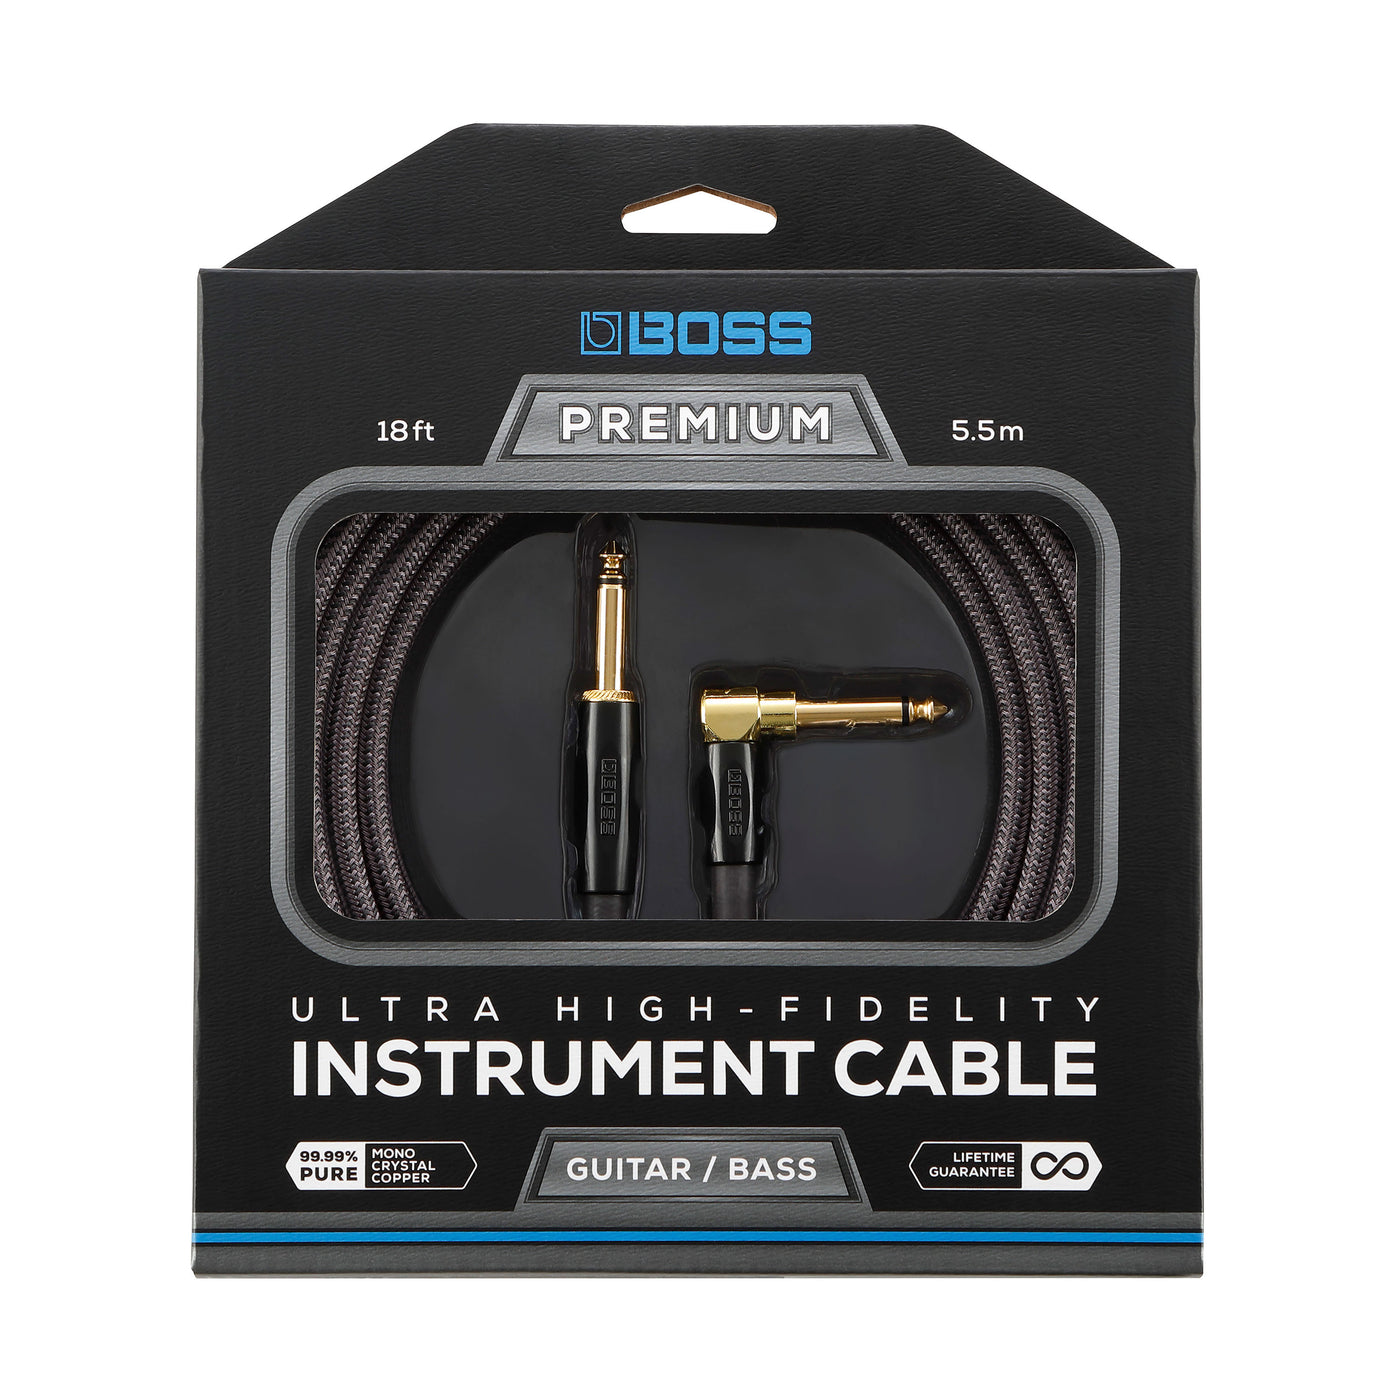 Boss BIC-P18A Premium Standard Instrument Cable, 18ft/5.5m with 1 Straight, 1 Angled Jack